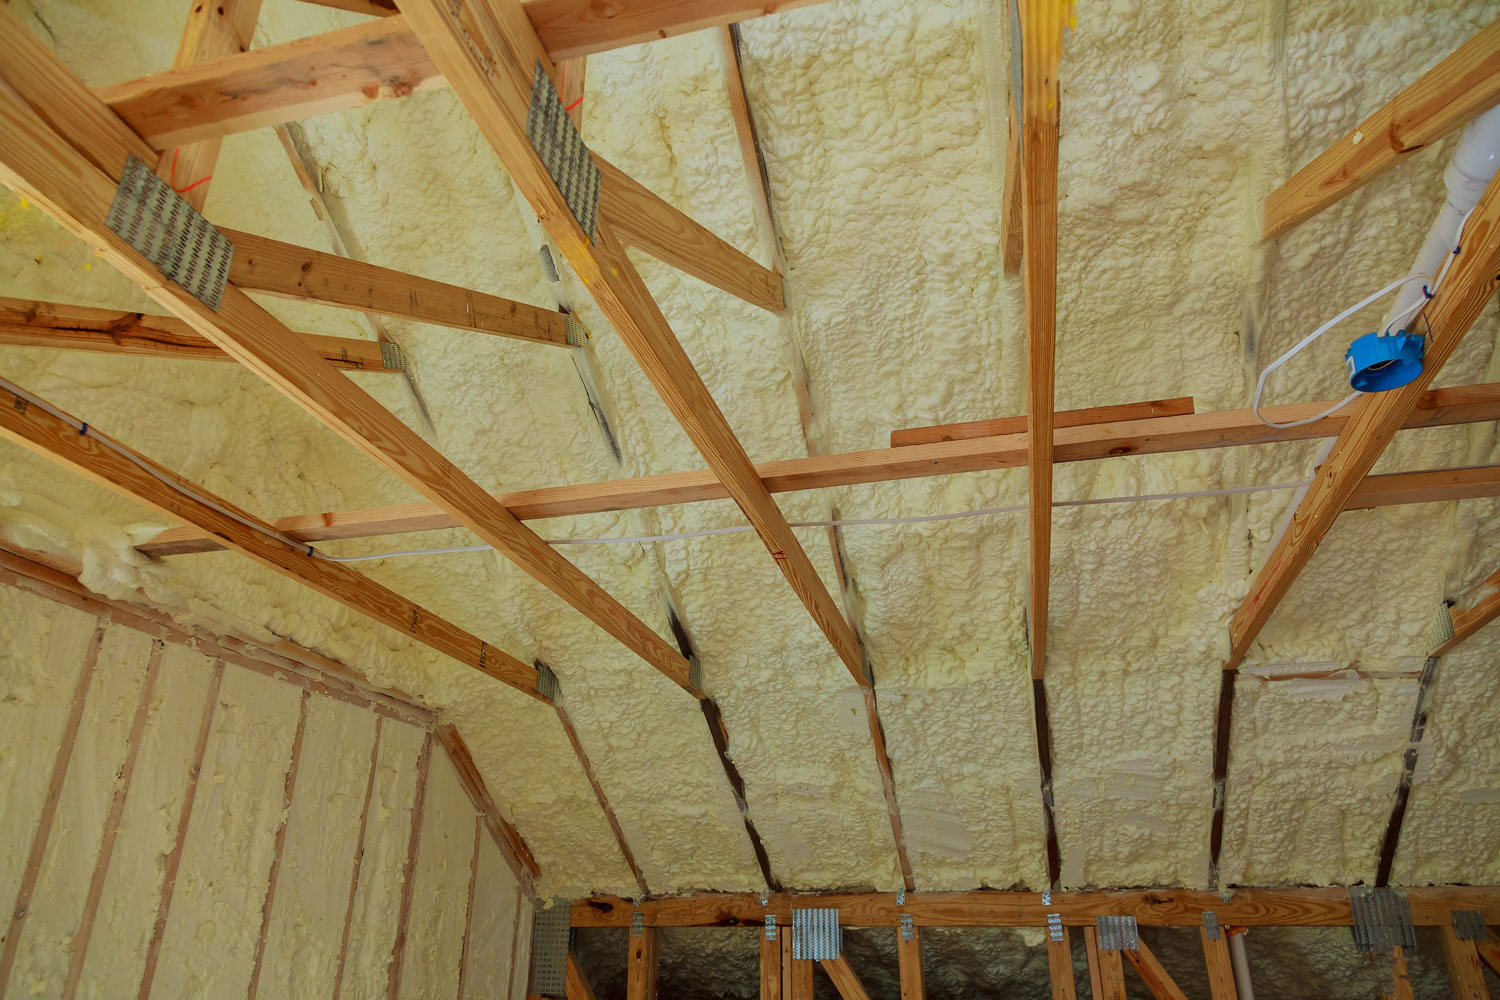 The ceiling of a house with spray foam insulation in between each trusses